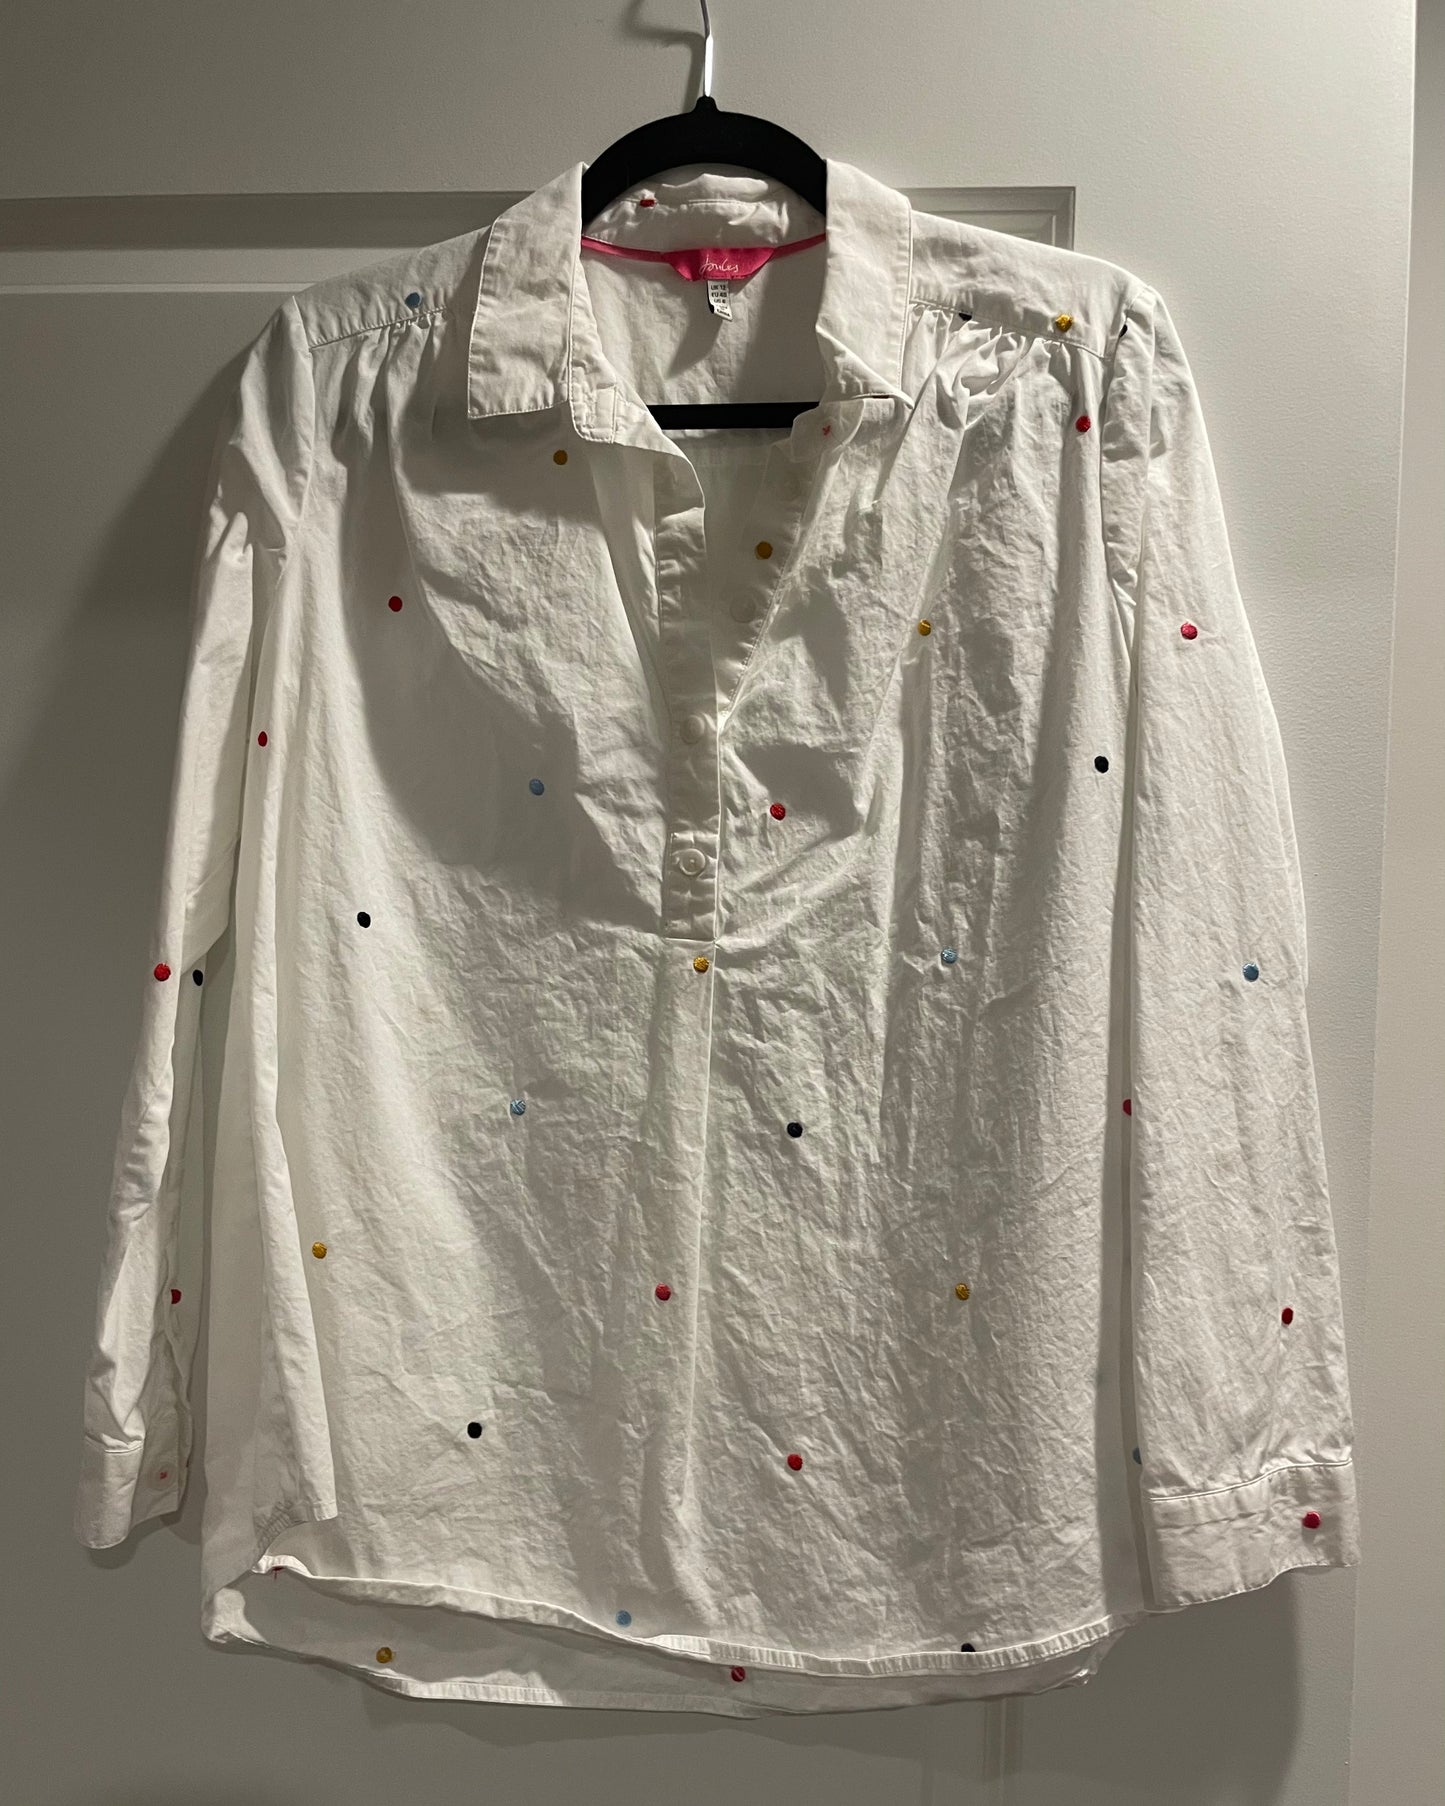 Joules dress shirt with embroidered dots size 8